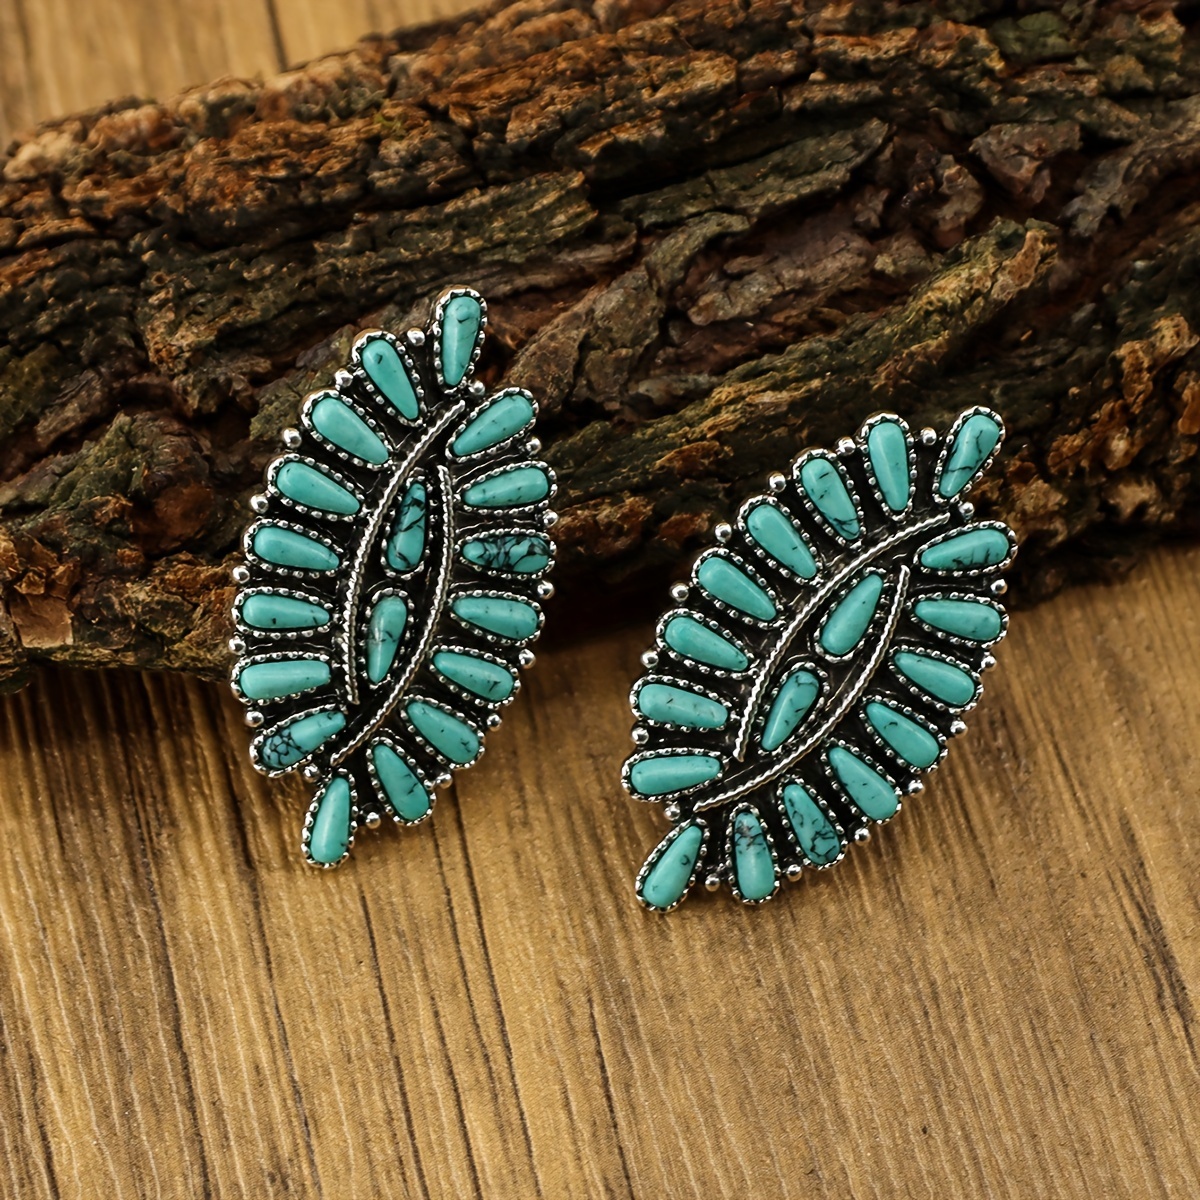 

Boho-inspired Turquoise Leaf Design Earrings - Antique Finish, Hypoallergenic Metal Posts